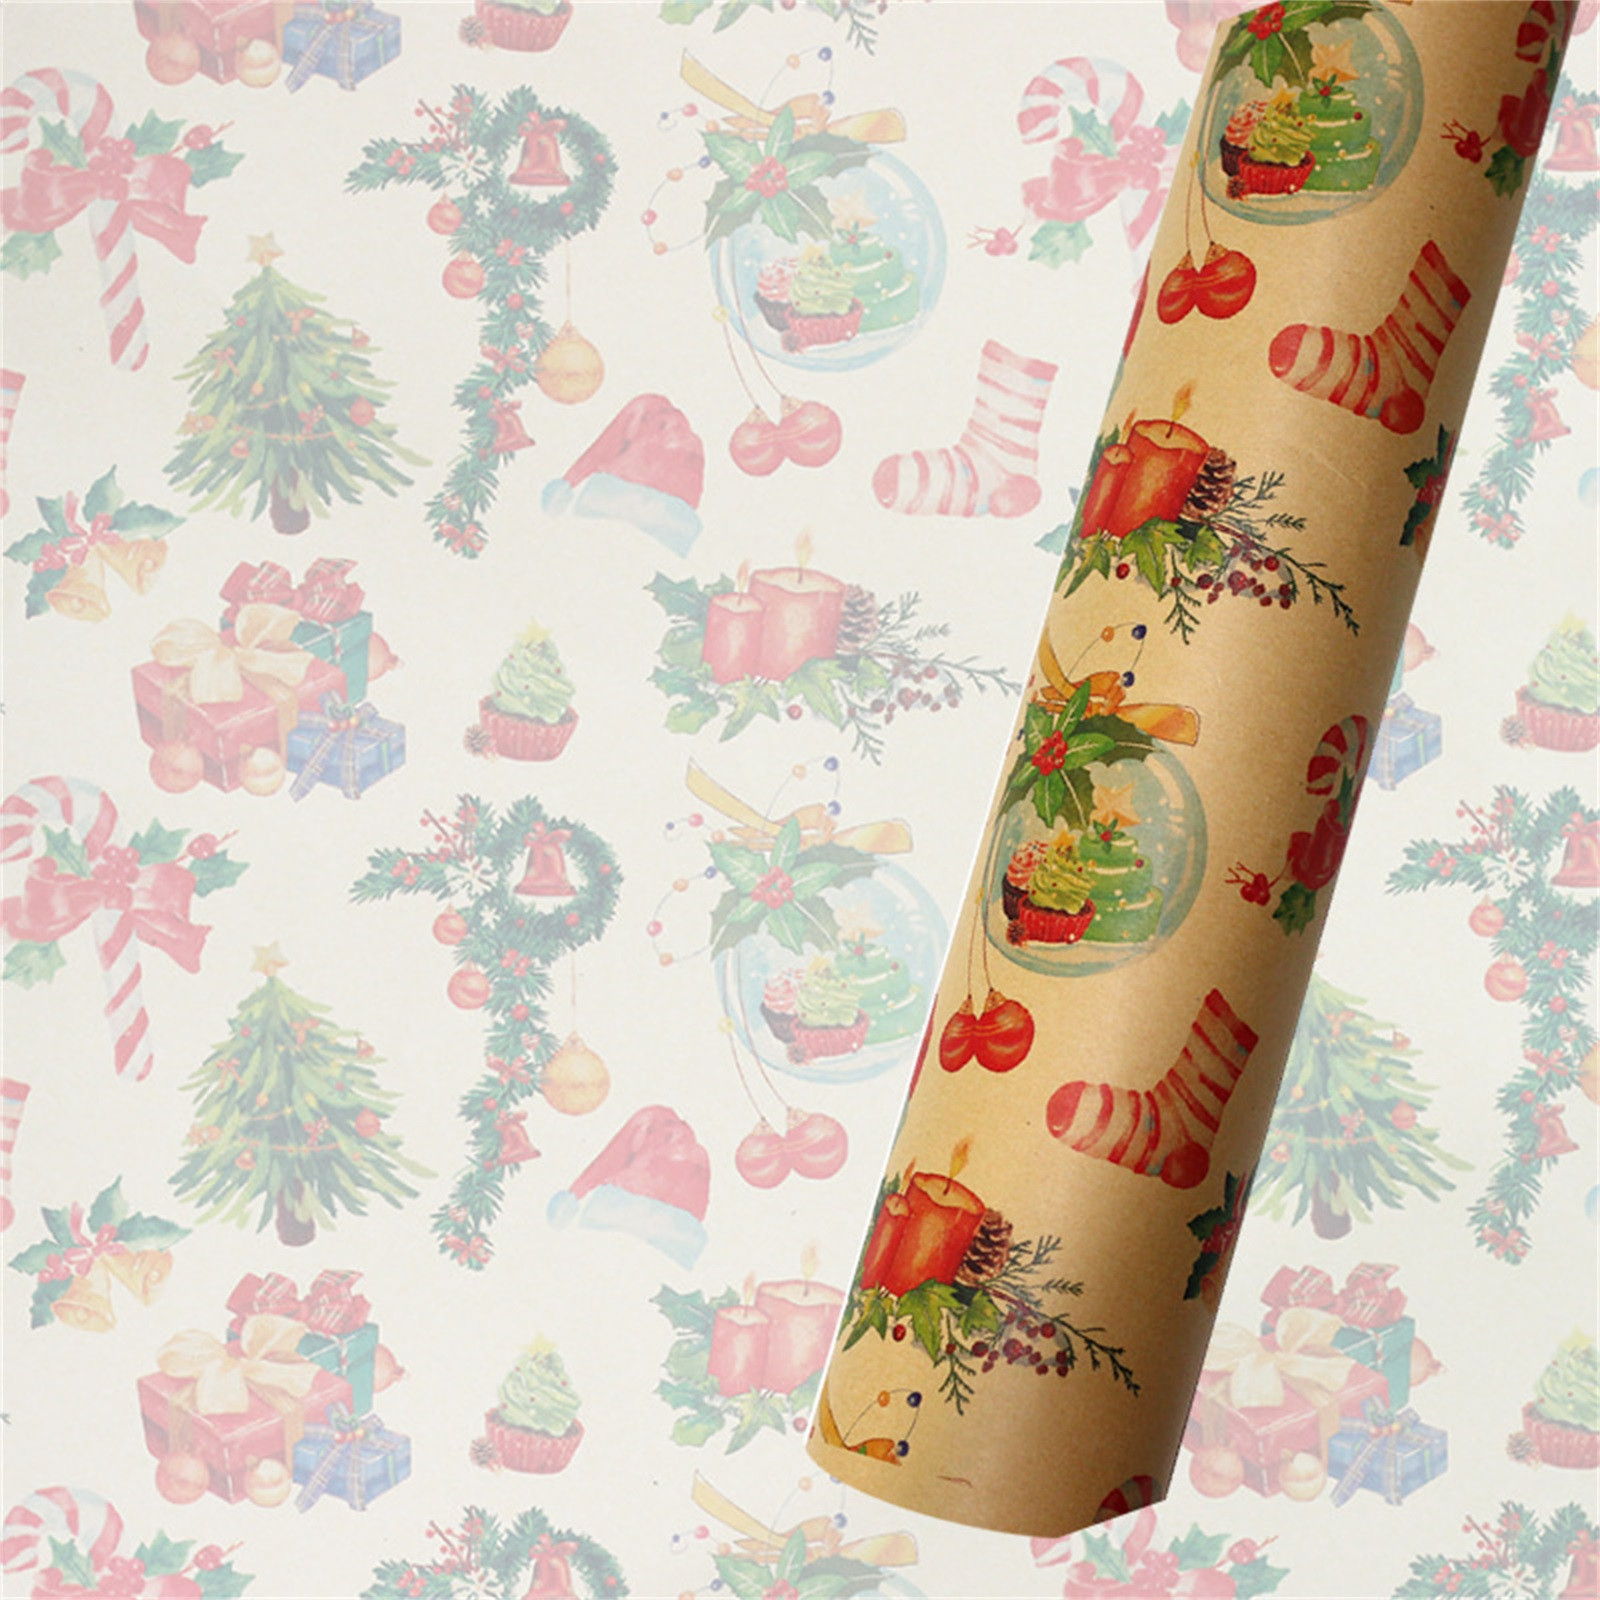 solacol Brown Paper Wrapping Paper Roll Christmas Printing Kraft Paper Roll  Crafts Art Gift Packaging Decorative Paper Christmas Wrapping Paper Rolls  Christmas Gift Wrapping Paper 